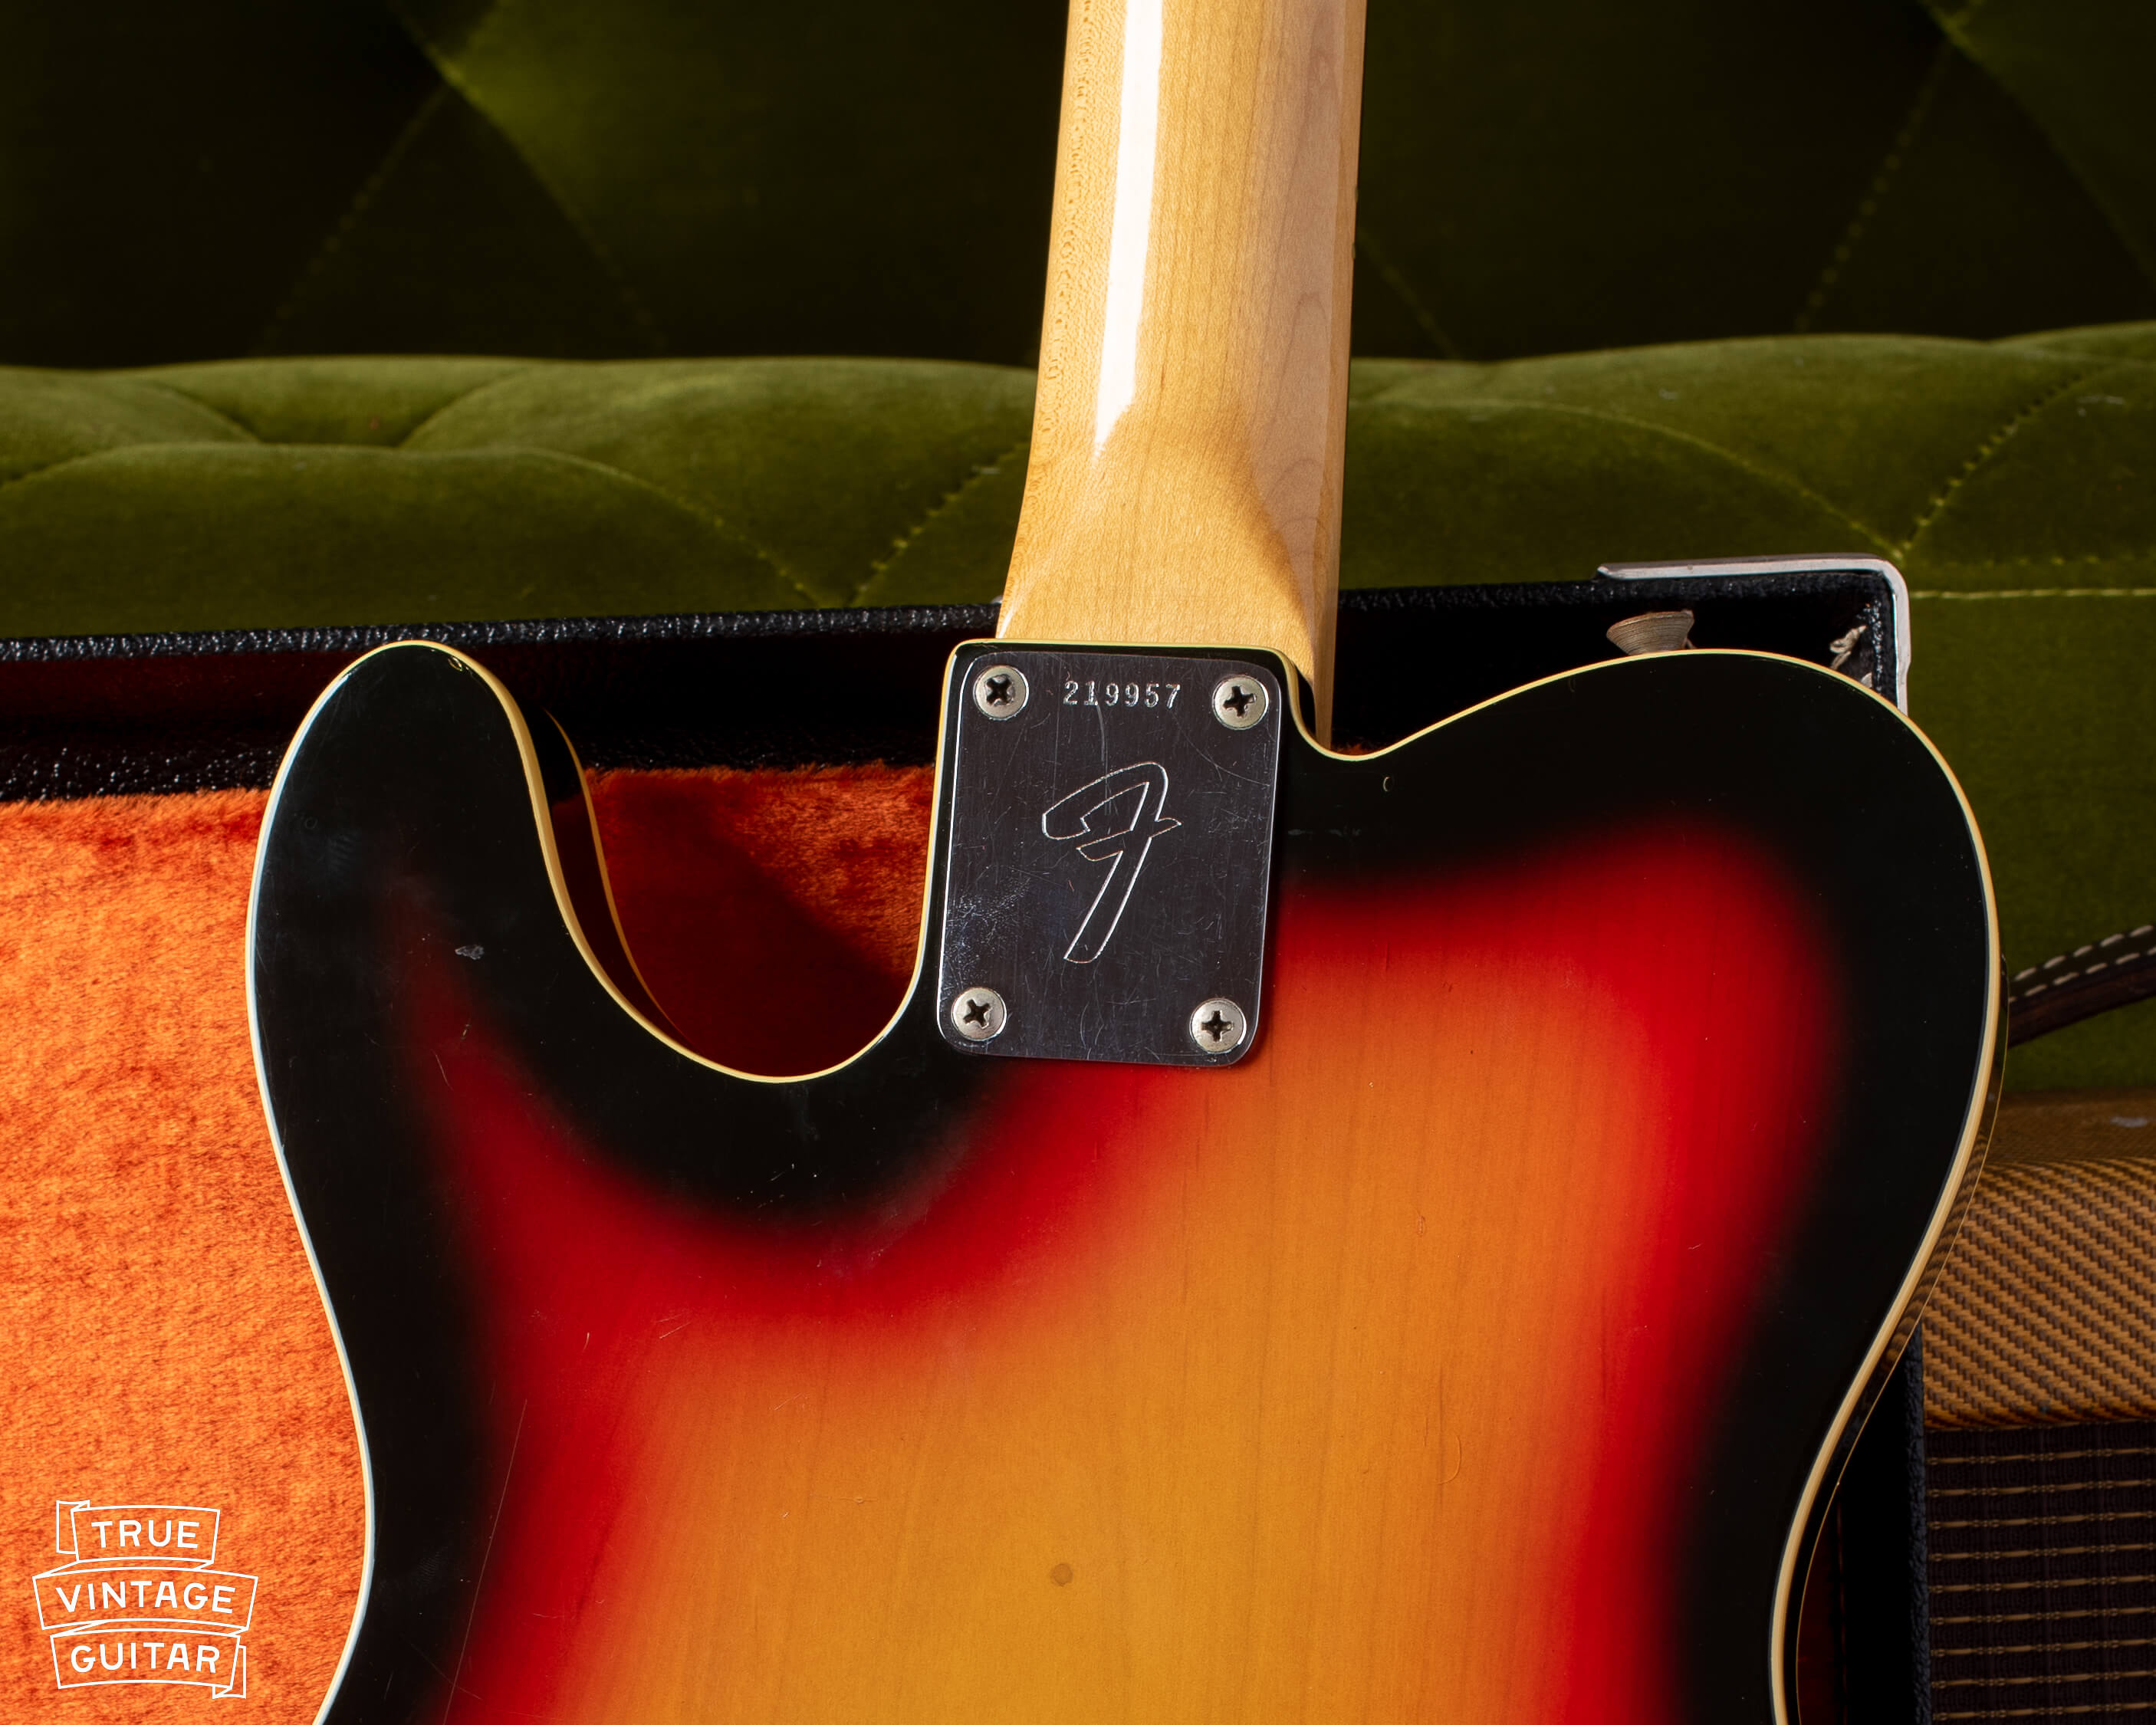 Fender serial numbers on the neck plate